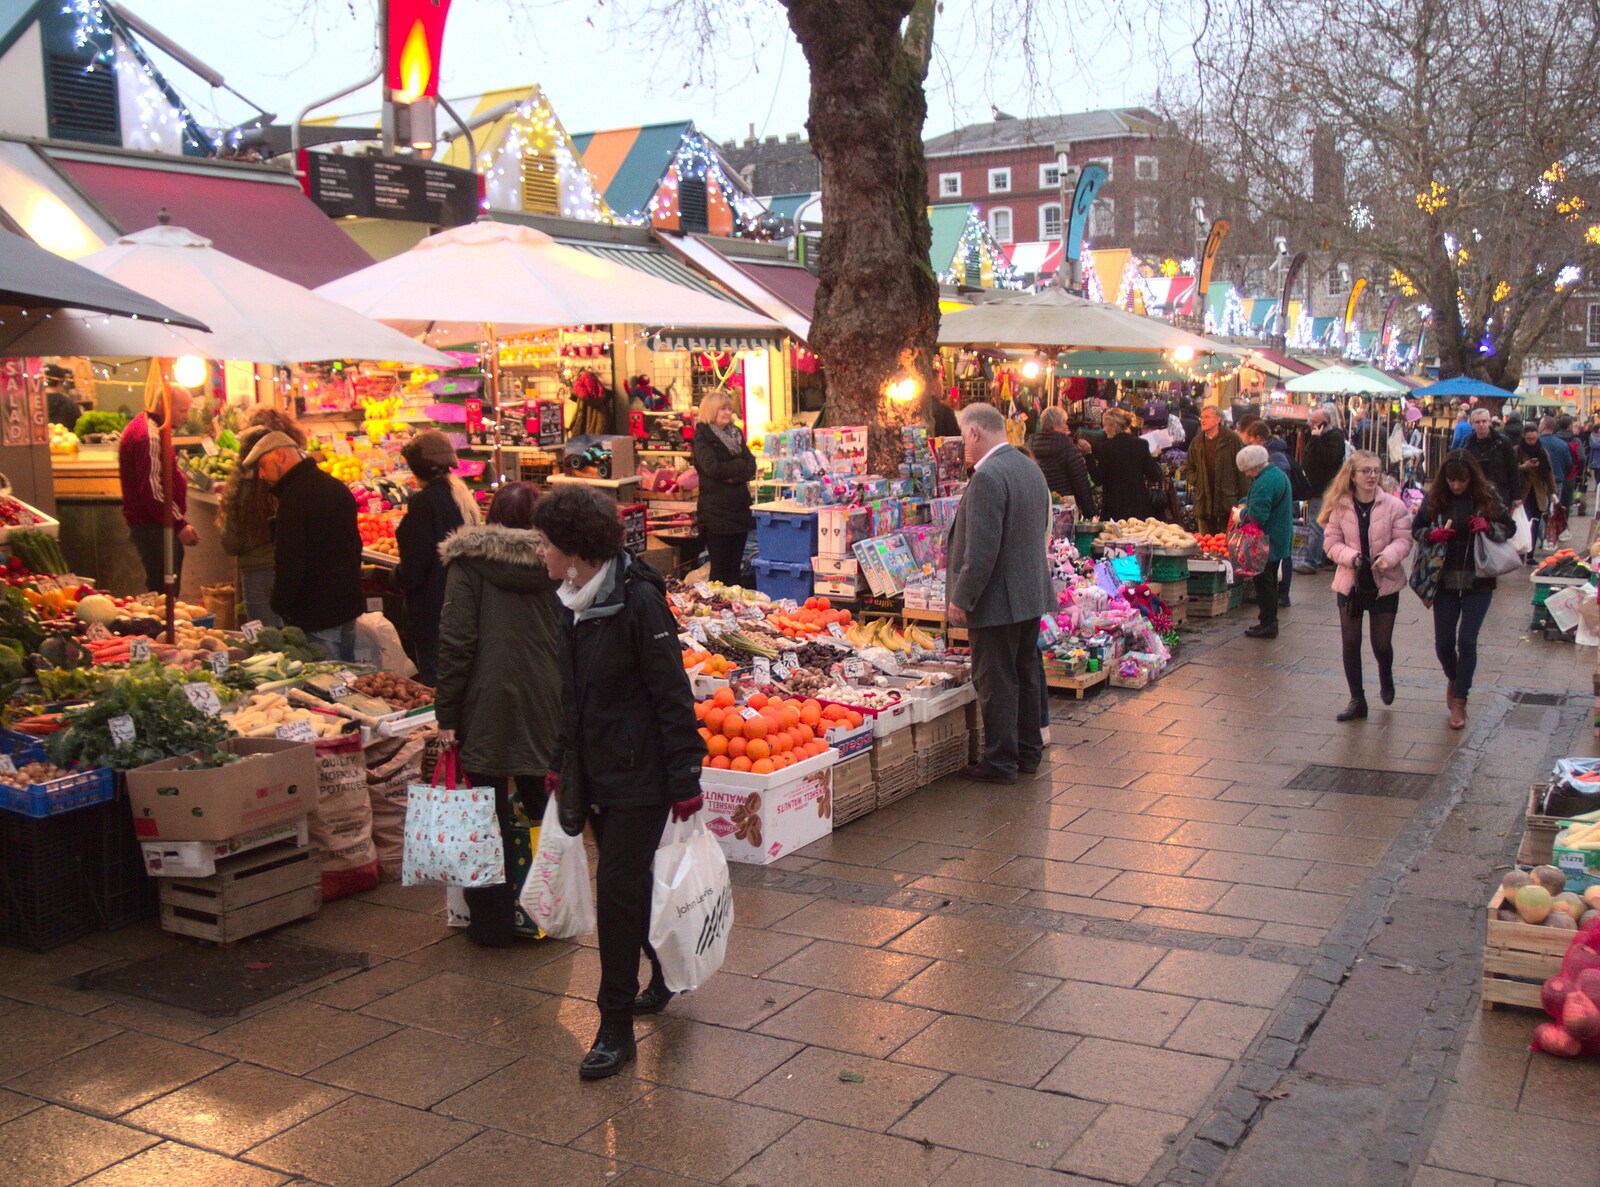 Stalls on Norwich market from A Spot of Christmas Shopping, Norwich and Diss, Norfolk - 23rd December 2017